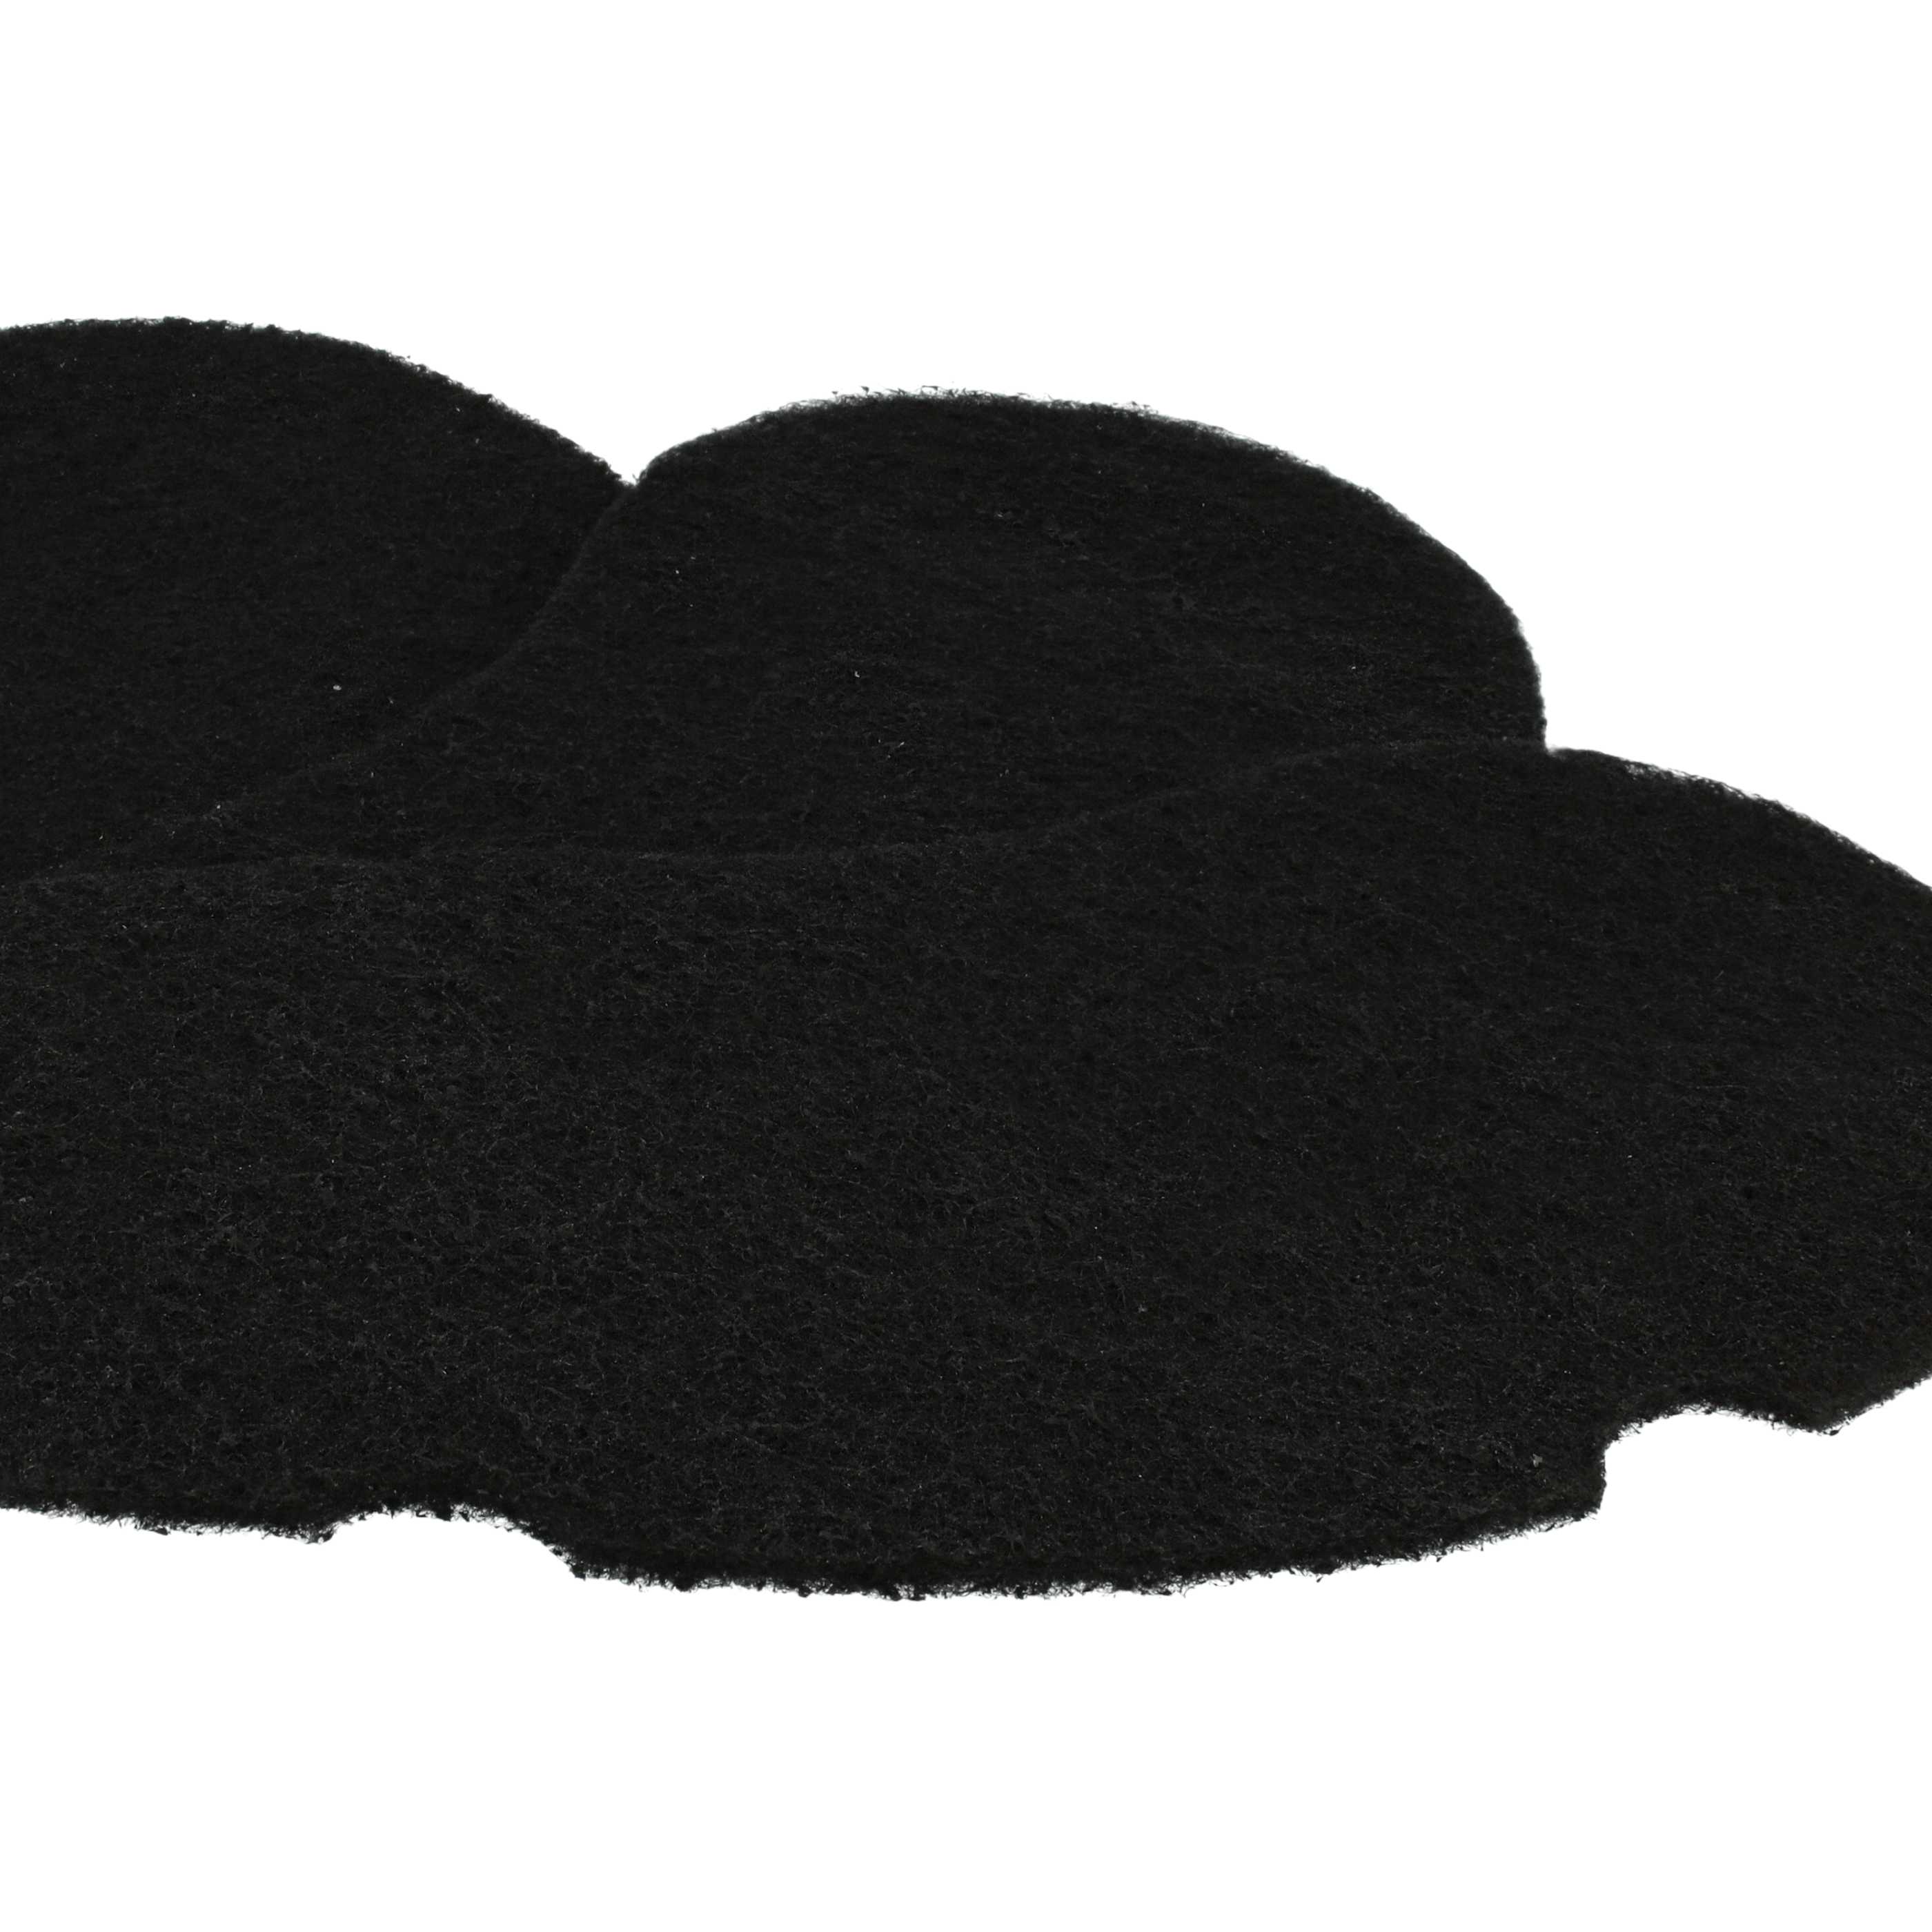 3x Activated Carbon Filter replaces SEB XA500025 for Tefal Deep Fat Fryer etc. - 18.6 x 8.8 x 0.3 cm